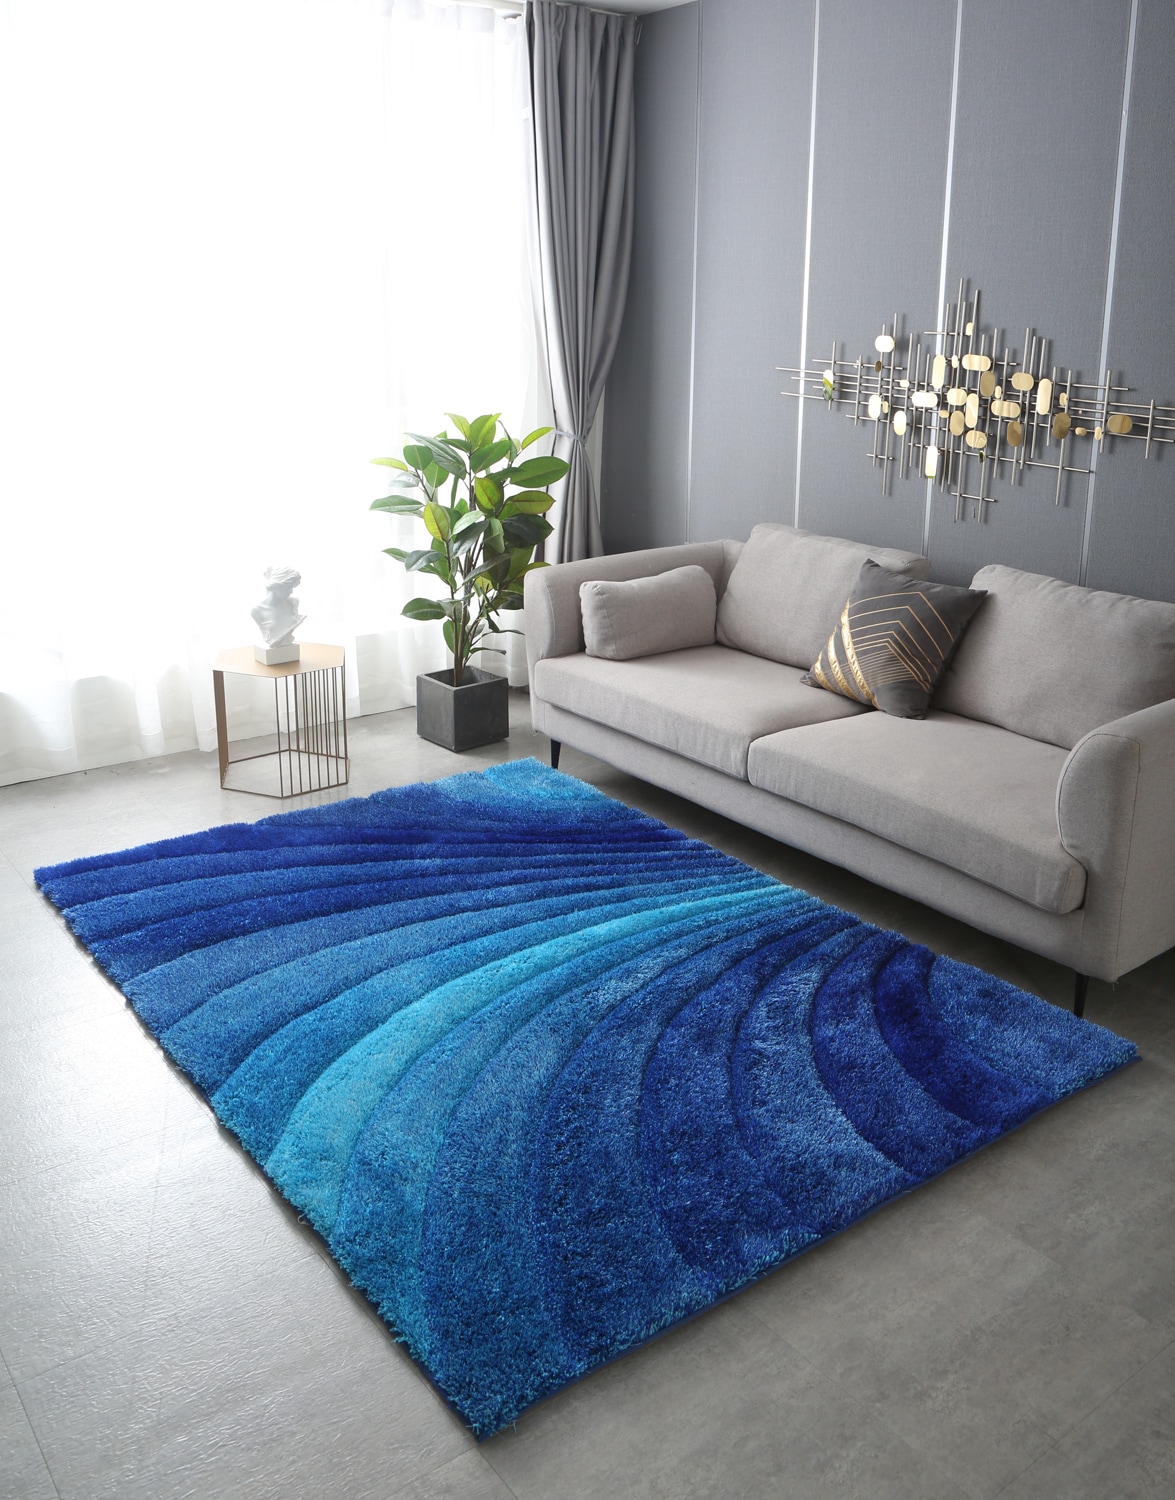 Amazing Rugs A1013-23 2 x 3 ft. Fuzzy Shaggy Blue Hand Tufted Area Rug